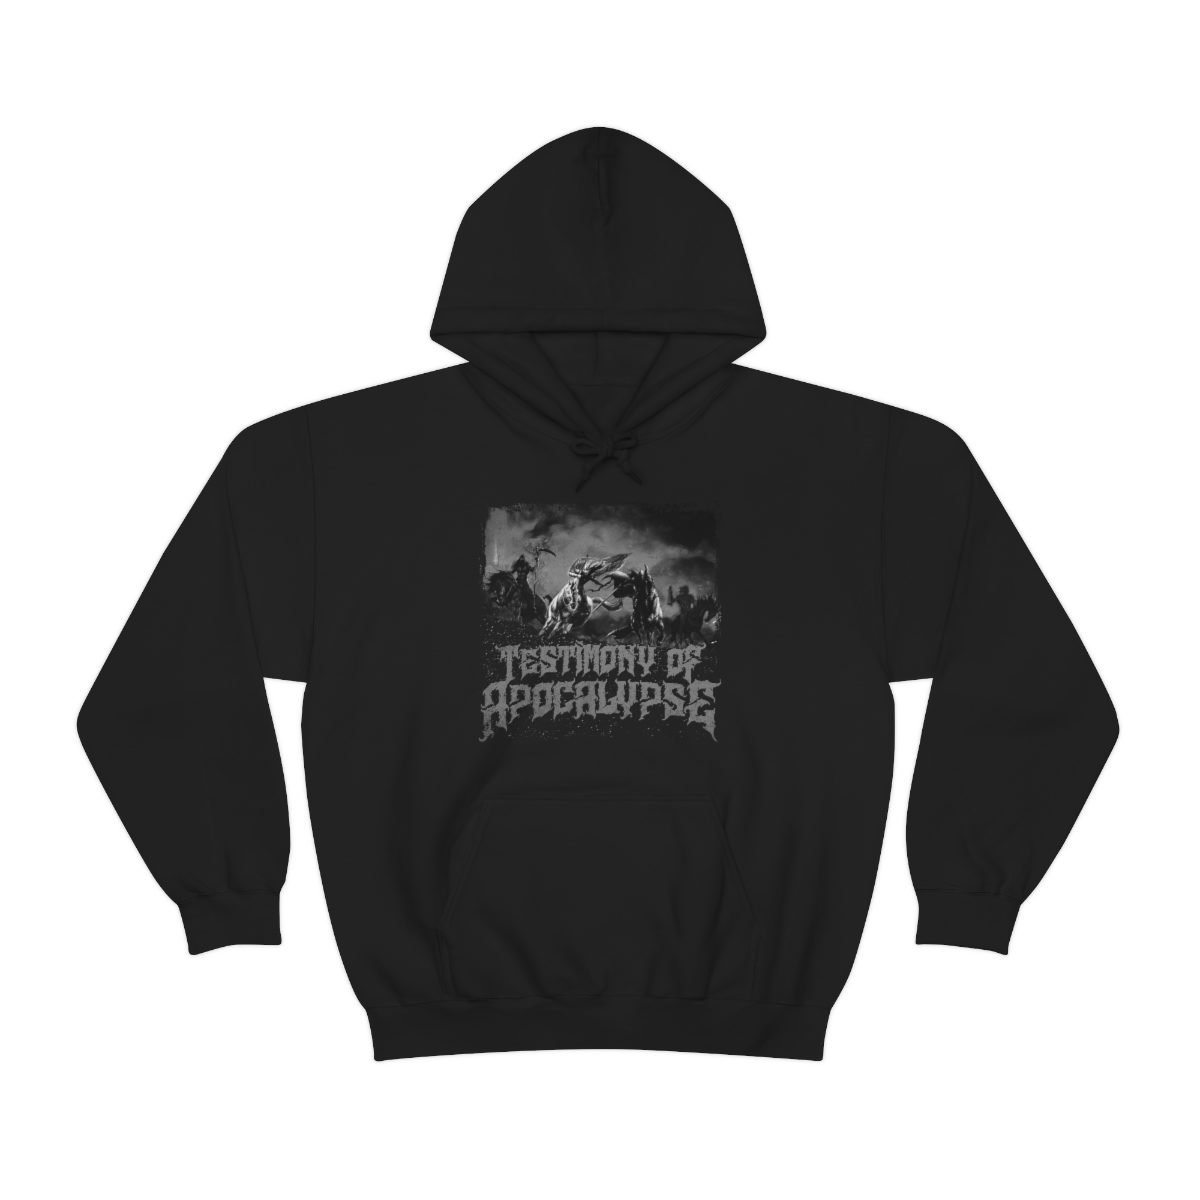 Testimony of Apocalypse Black and White Pullover Hooded Sweatshirt 185MD